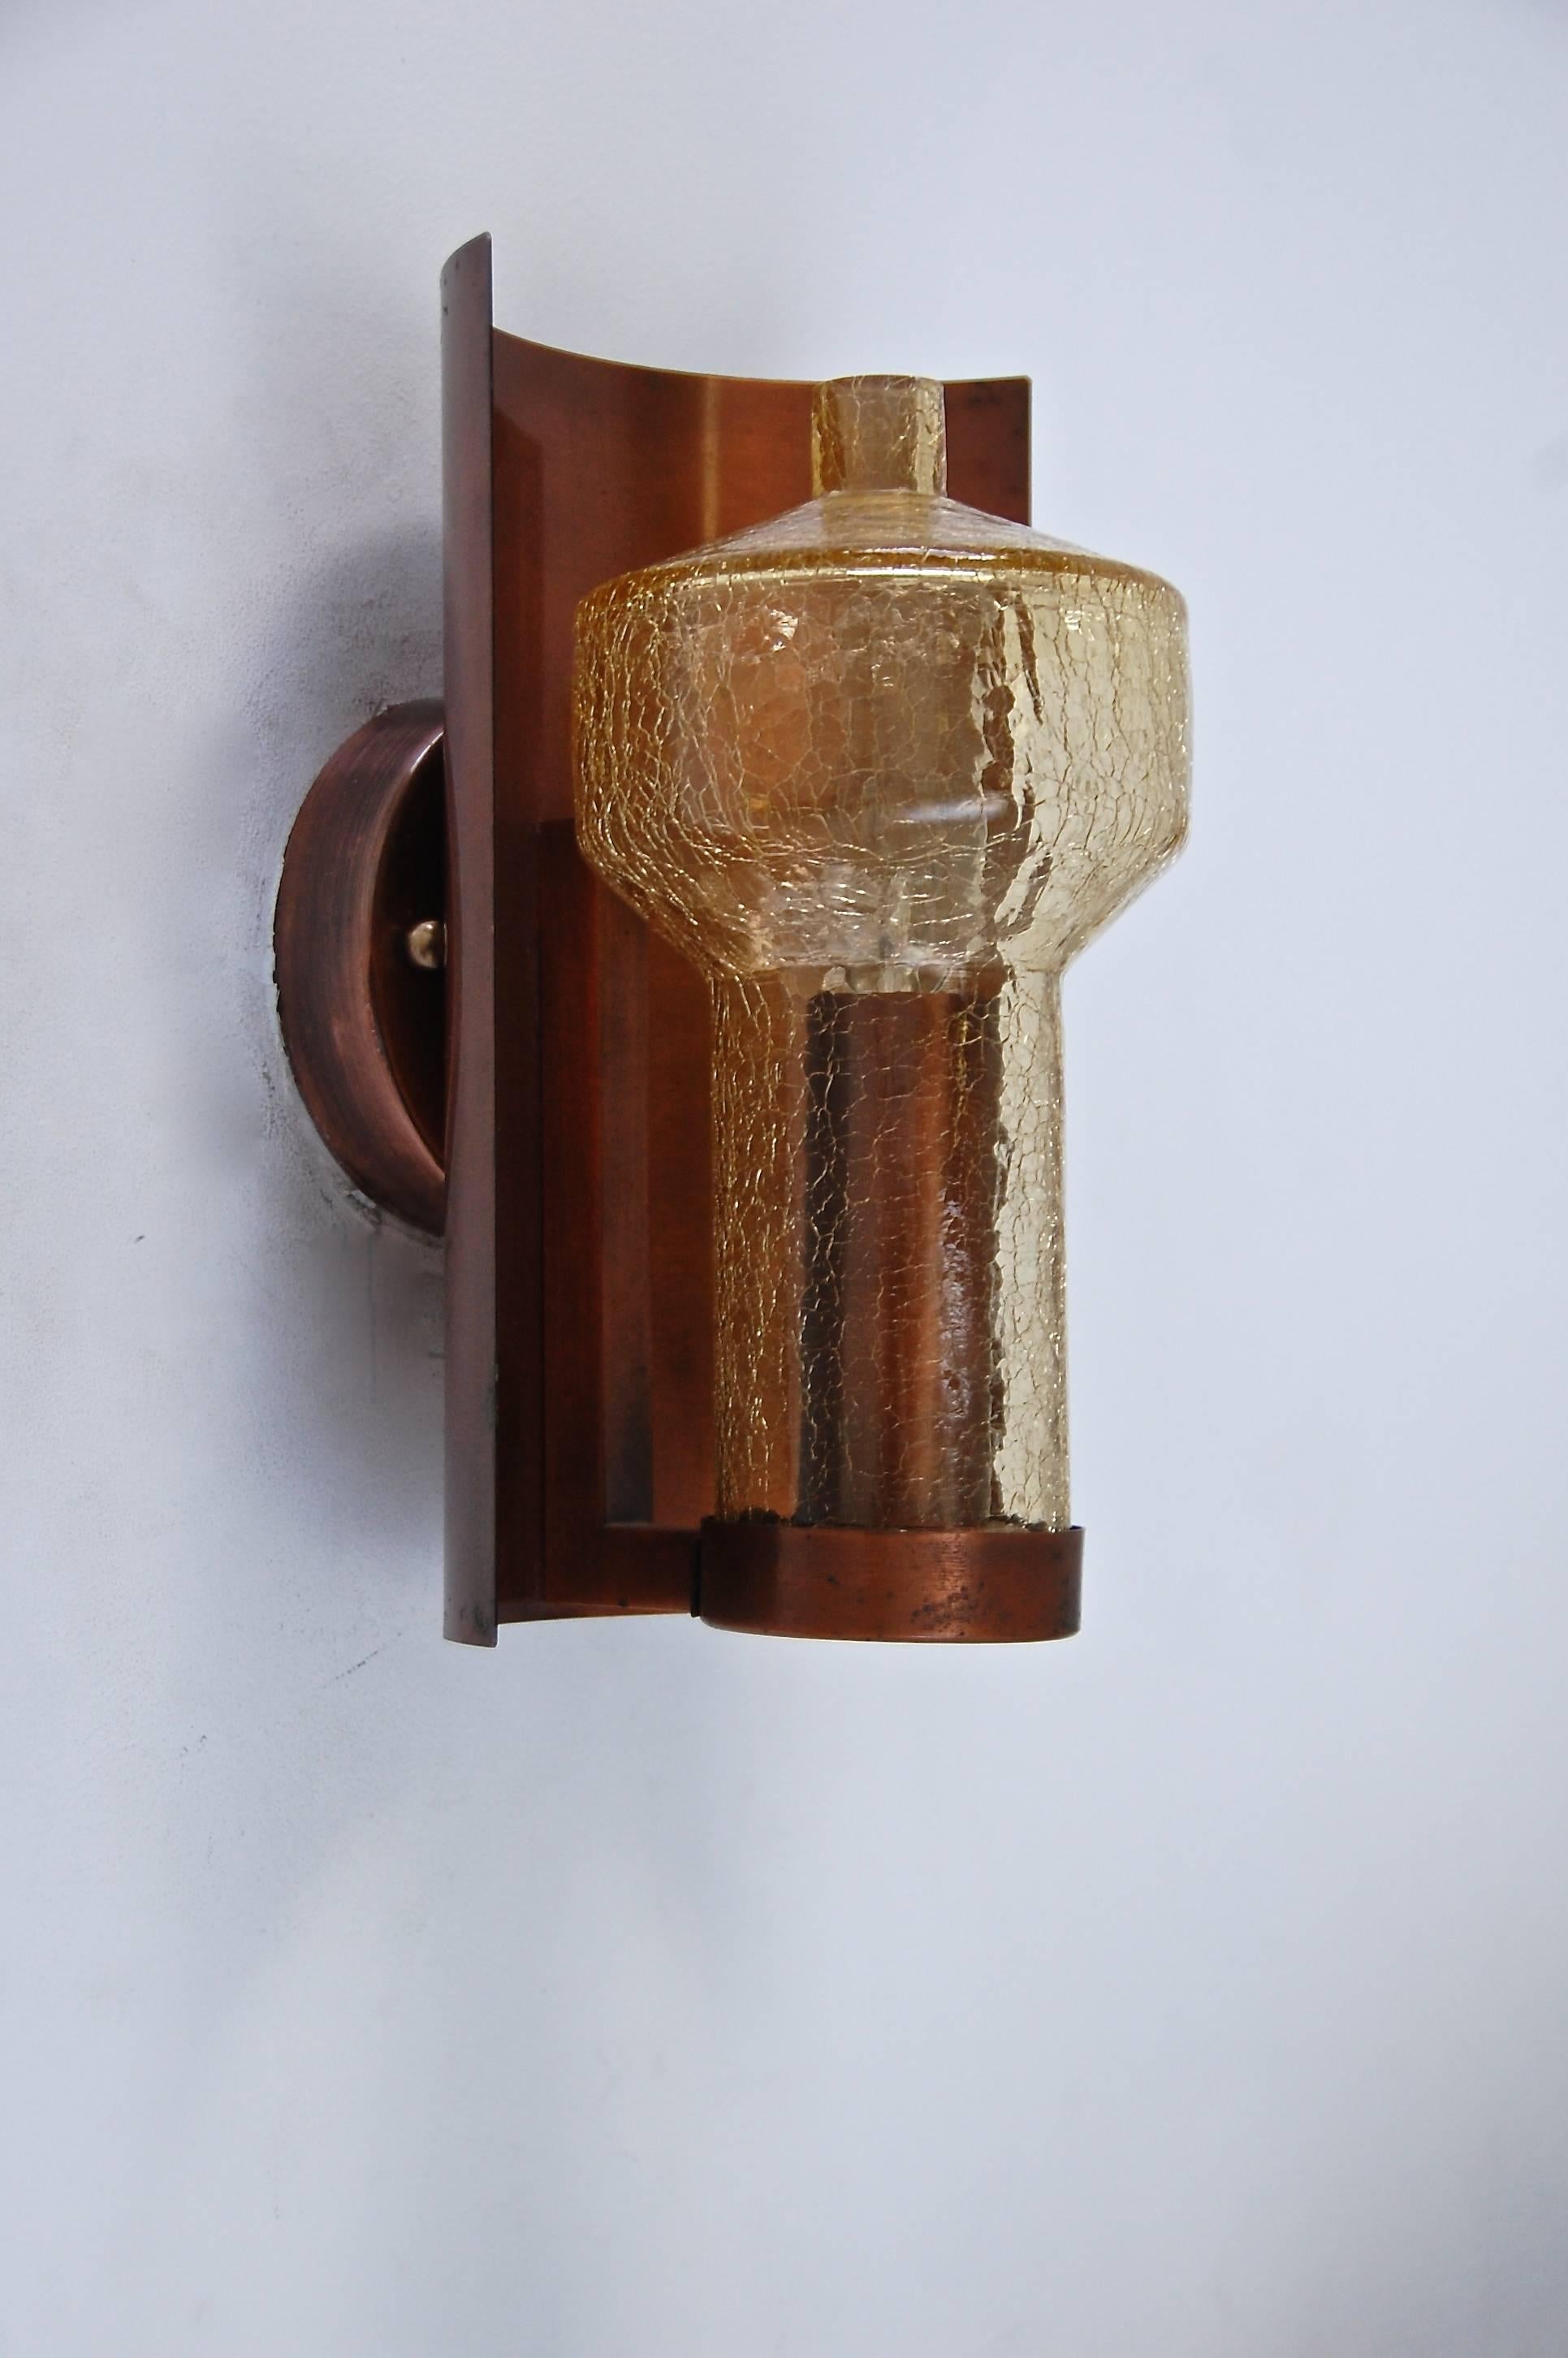 (2) superb Kaiser Leuchten sconces from Germany in vintage original finish, rewired and ready for use in the US. Handblown crackled amber glass and copper. Priced individually. Lightbulbs provided with order.
Measurements: 
Depth: 6